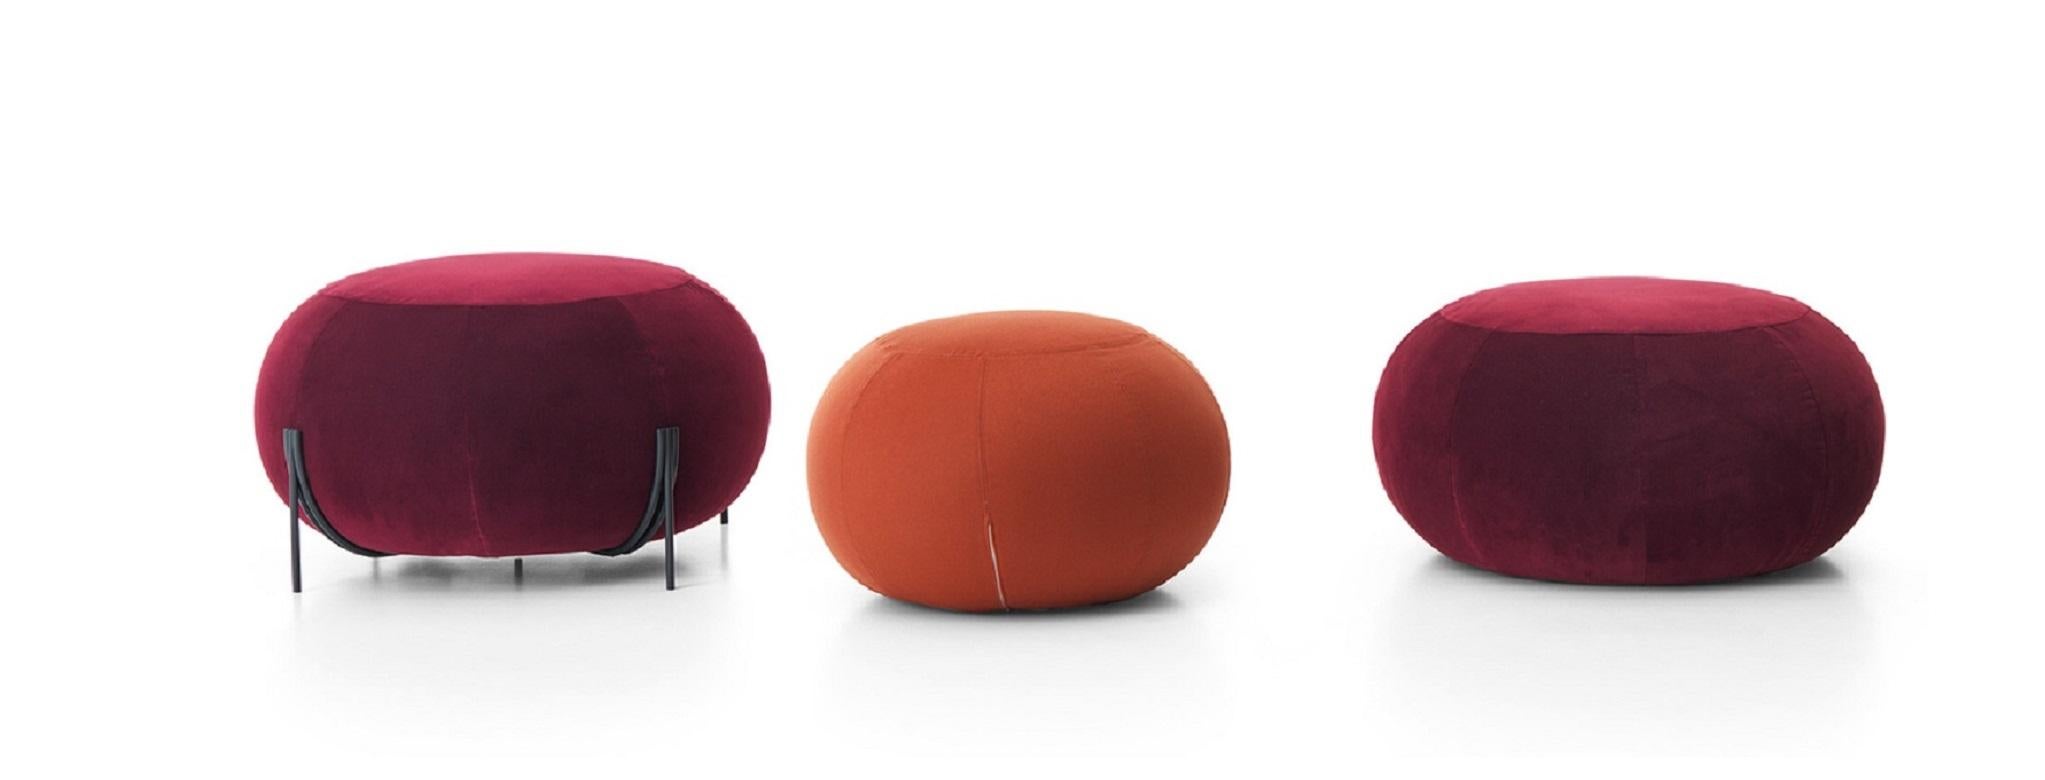 Geo Small Pouf in Lario Top Orange Upholstery by Paolo Grasselli For Sale 1